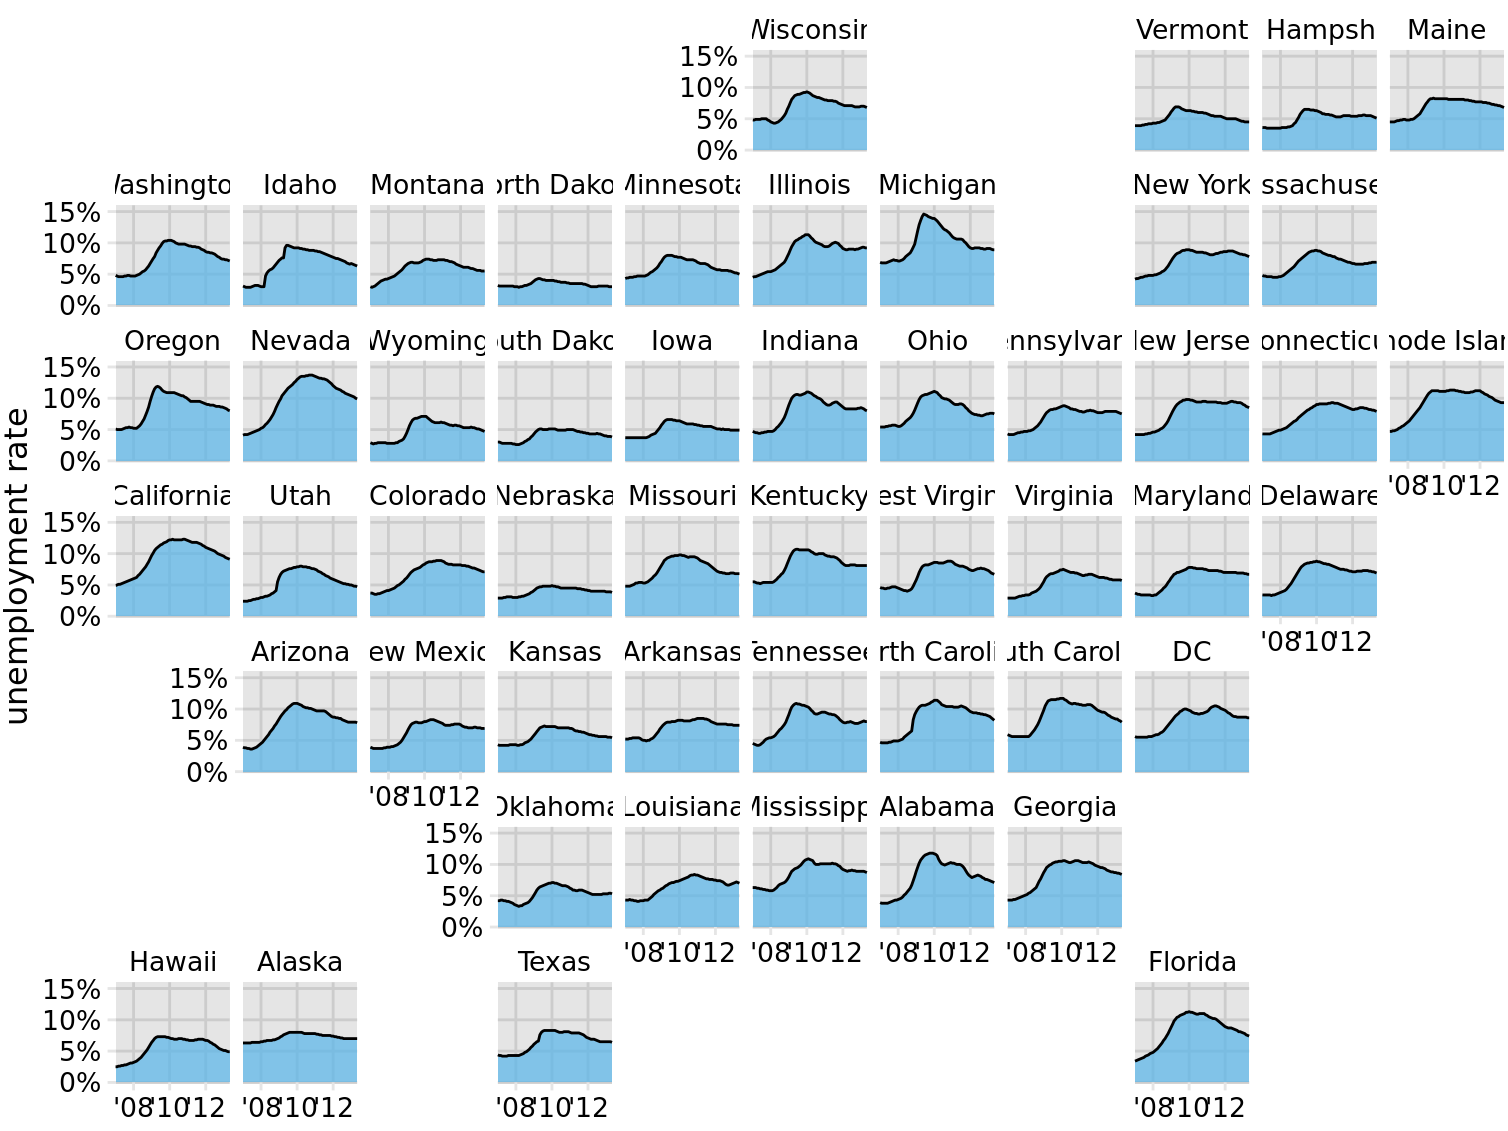 Unemployment rate leading up to and following the 2008 financial crisis, by state. Each panel shows the unemployment rate for one state, including the District of Columbia (DC), from January 2007 through May 2013. Vertical grid lines mark January of 2008, 2010, and 2012. States that are geographically close tend to show similar trends in the unemployment rate. Data source: U.S. Bureau of Labor Statistics